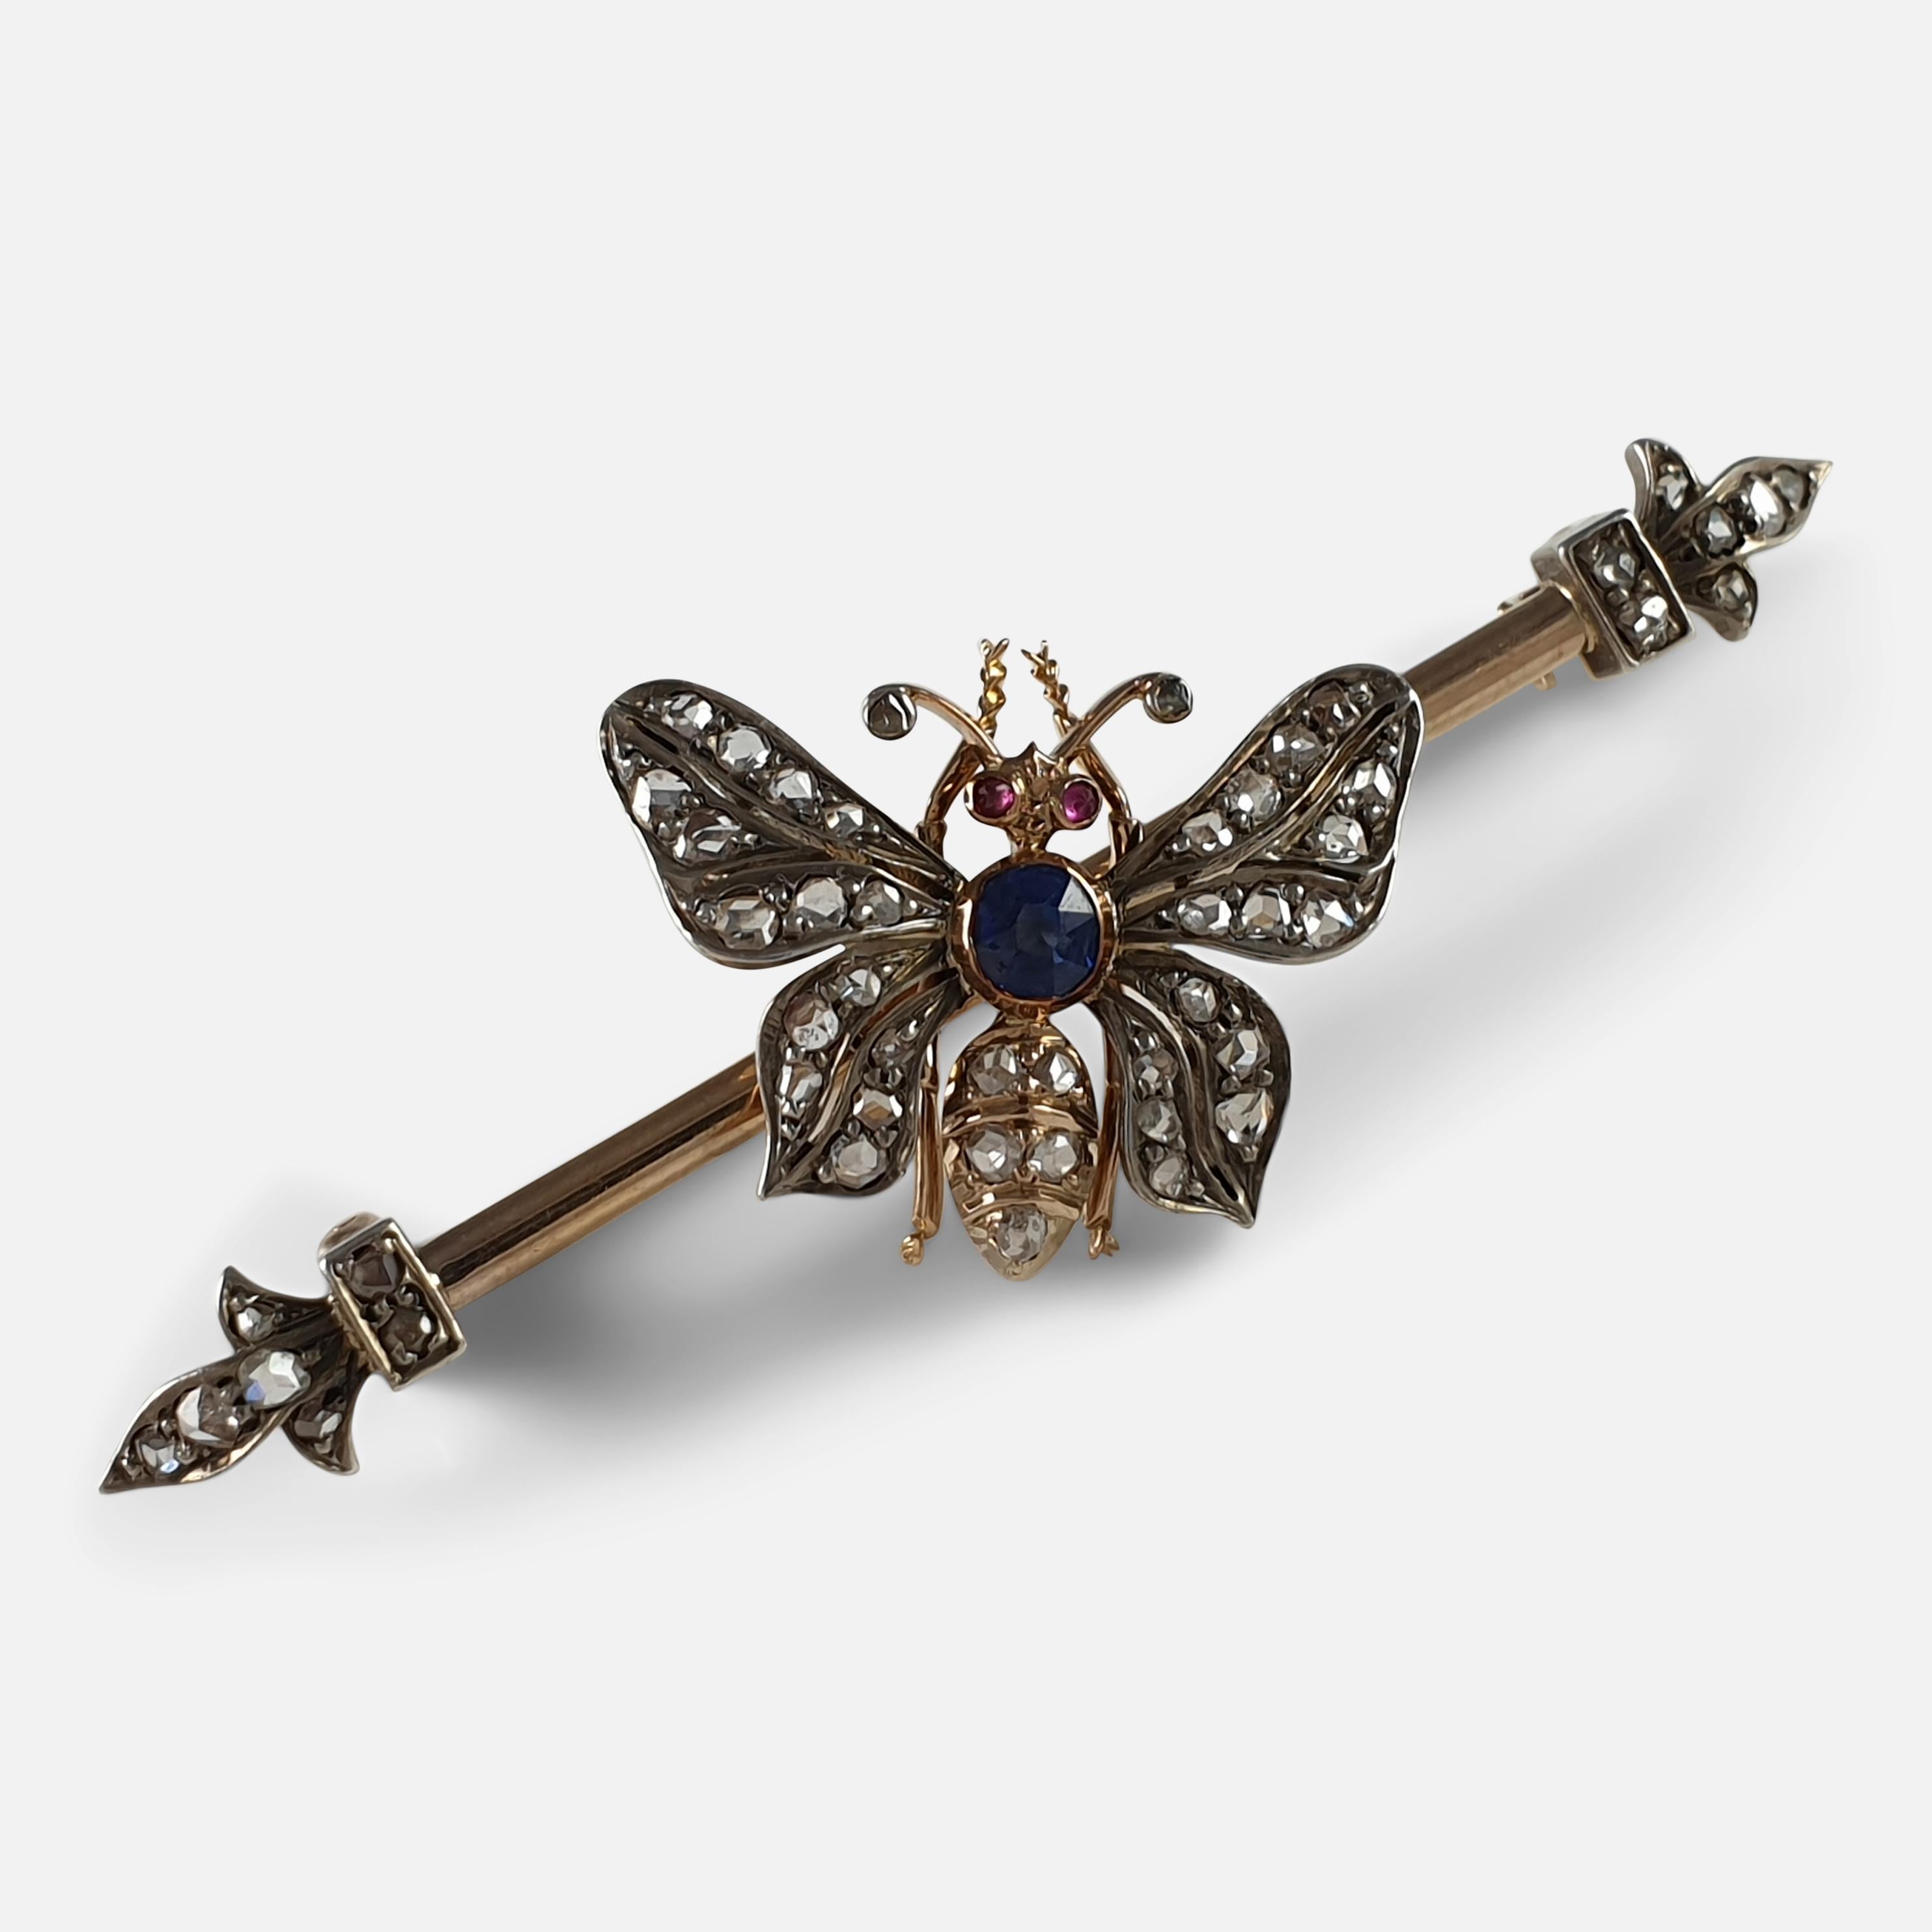 A 19th century 18k yellow gold, silver fronted, ruby, sapphire, and diamond butterfly brooch, circa 1895. The brooch is designed as a rose-cut diamond butterfly with circular-cut ruby eyes, cushion-shaped sapphire thorax, to a polished bar with